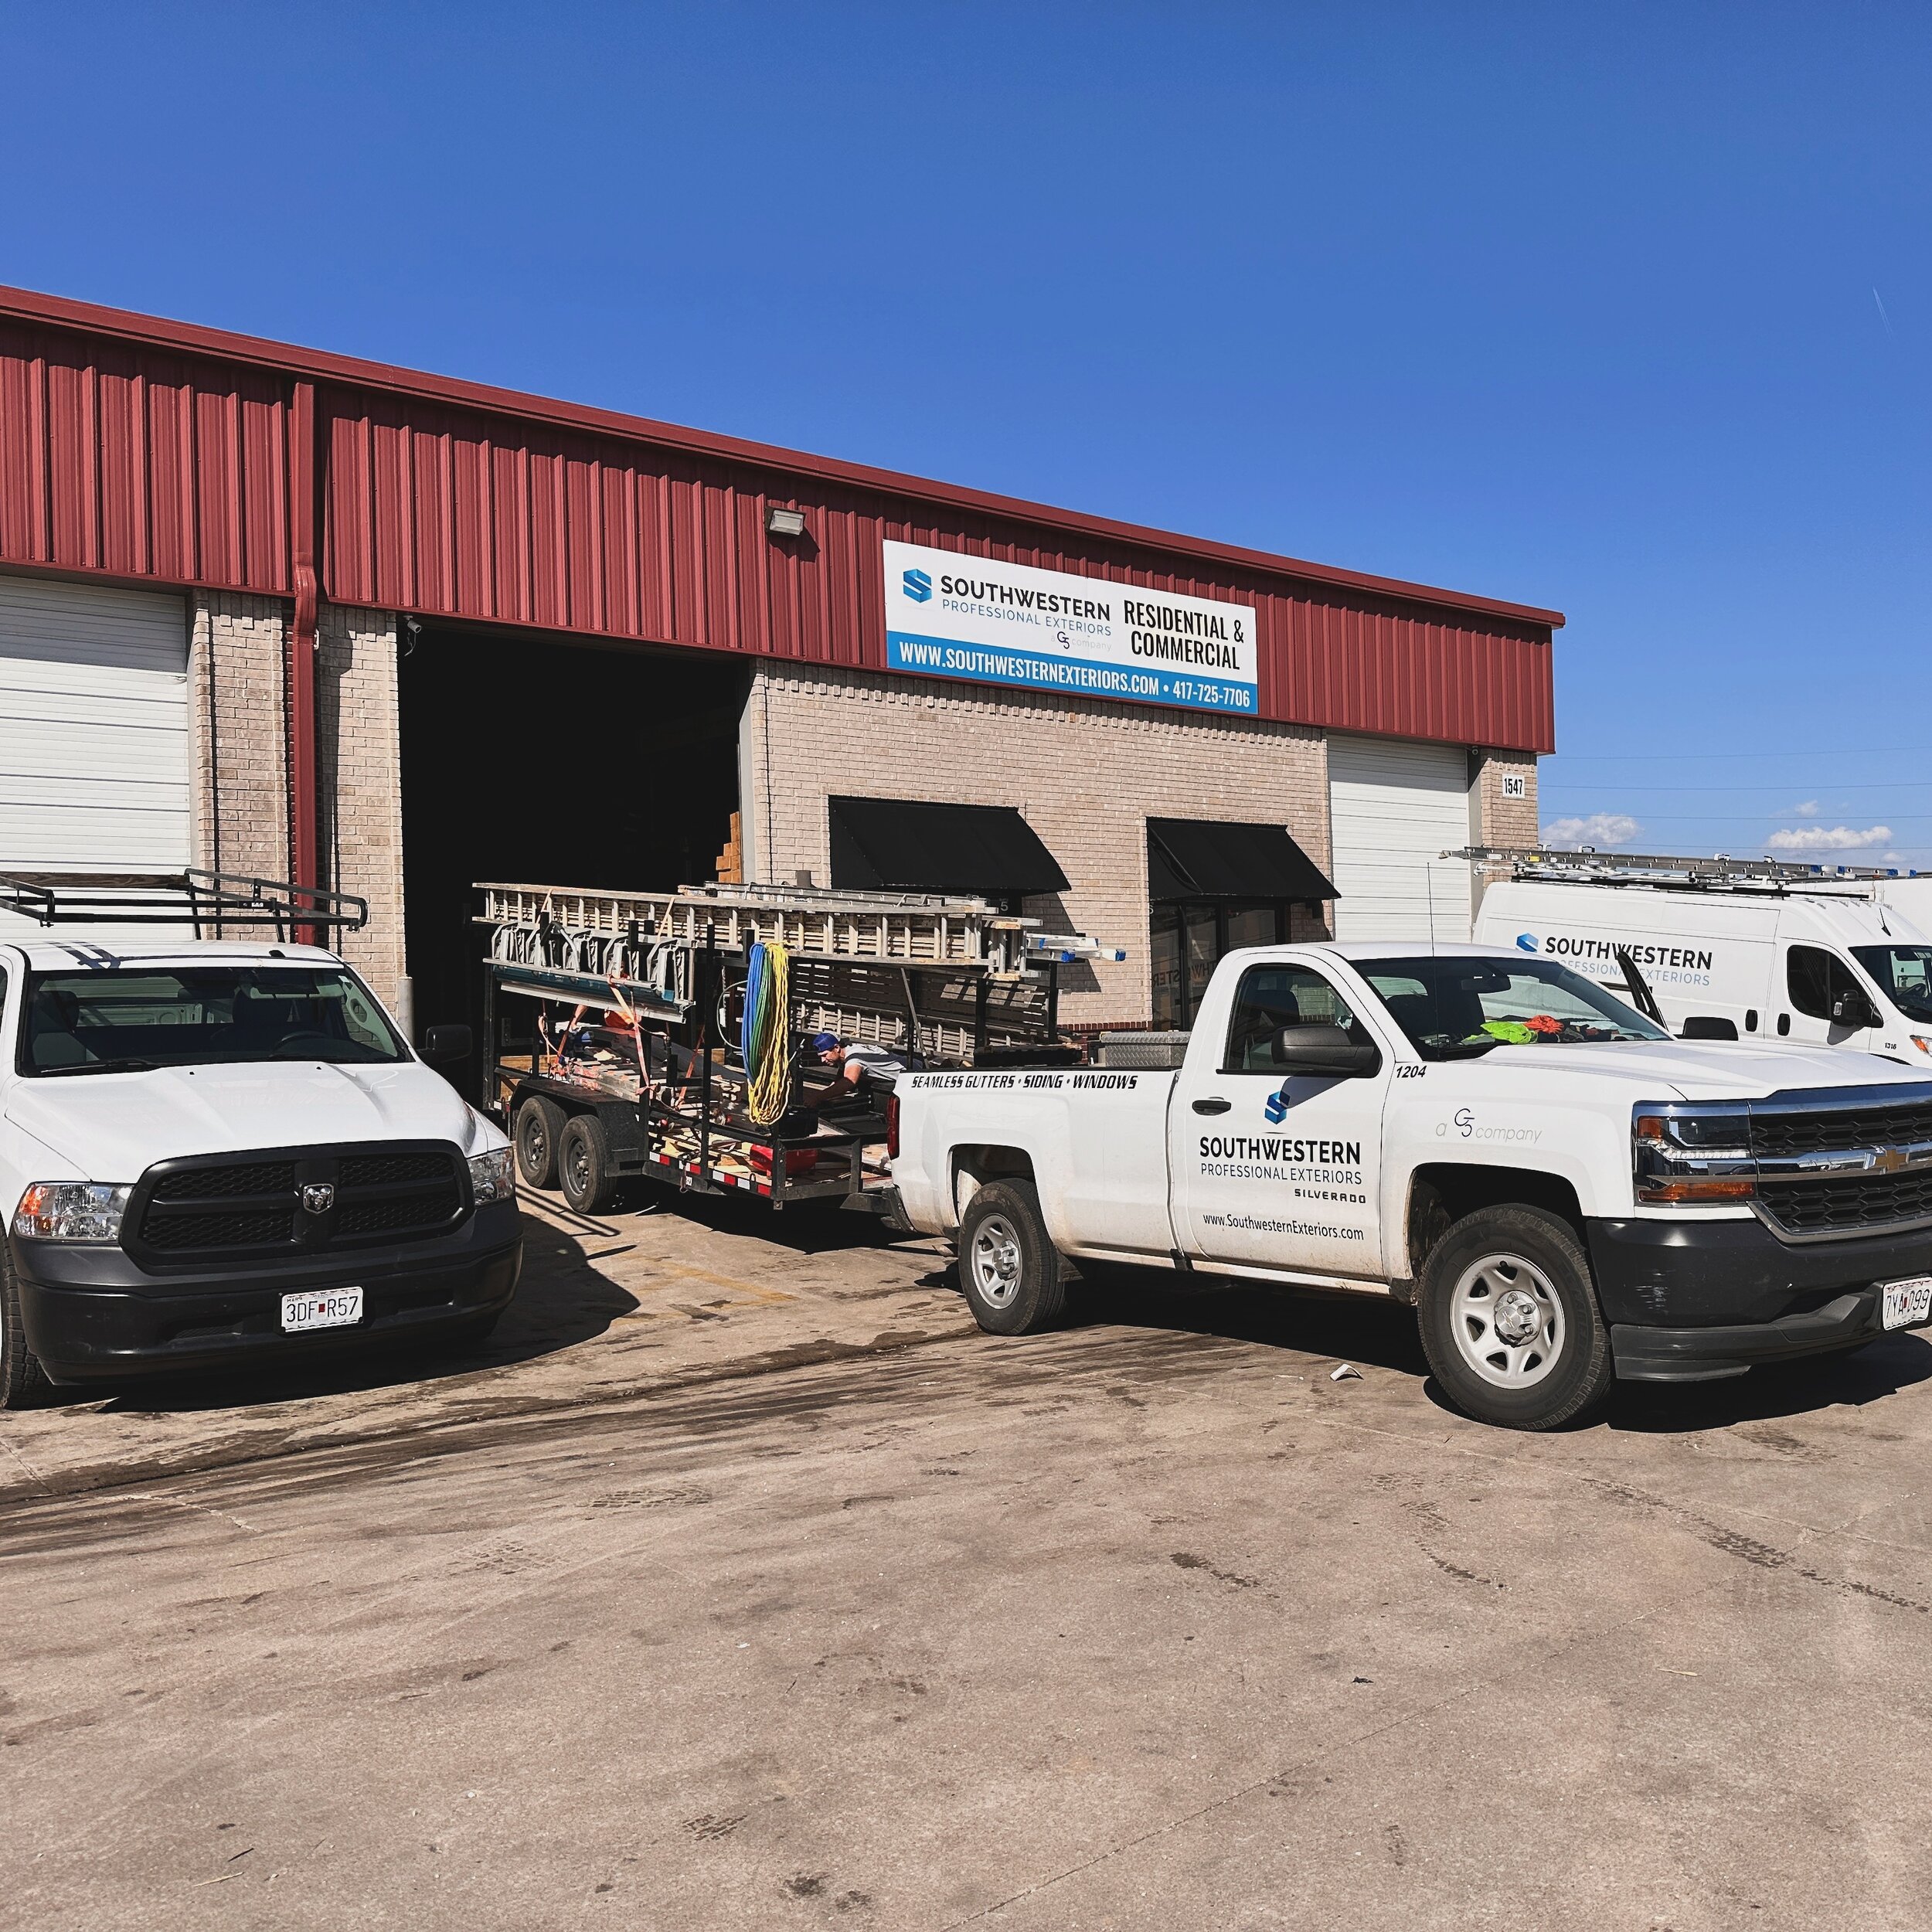 Happy Monday from Southwestern Exteriors! ☀️ 
-
Our crews are loaded up and ready to install some LP SmartSide siding today. Interested in learning more or getting a free estimate to re-side your home? Visit our website at the link in our bio for mor